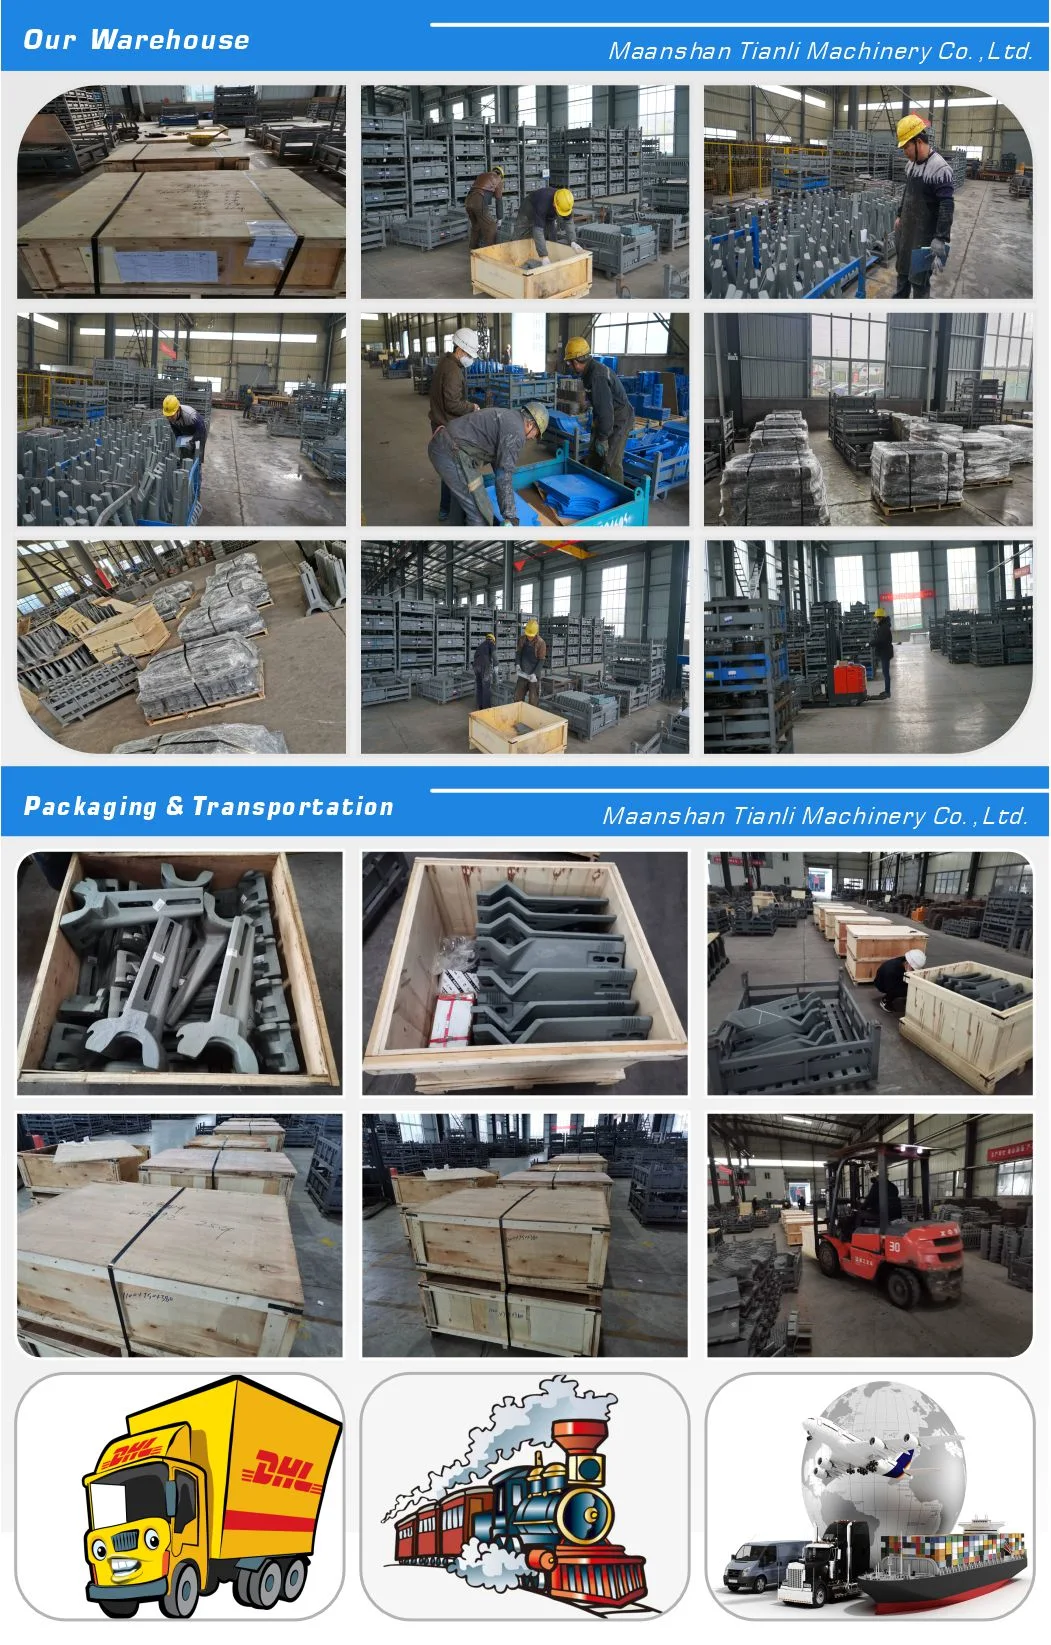 High Chromium Cast Iron Jaw Crusher Wear Resistant Spare Parts